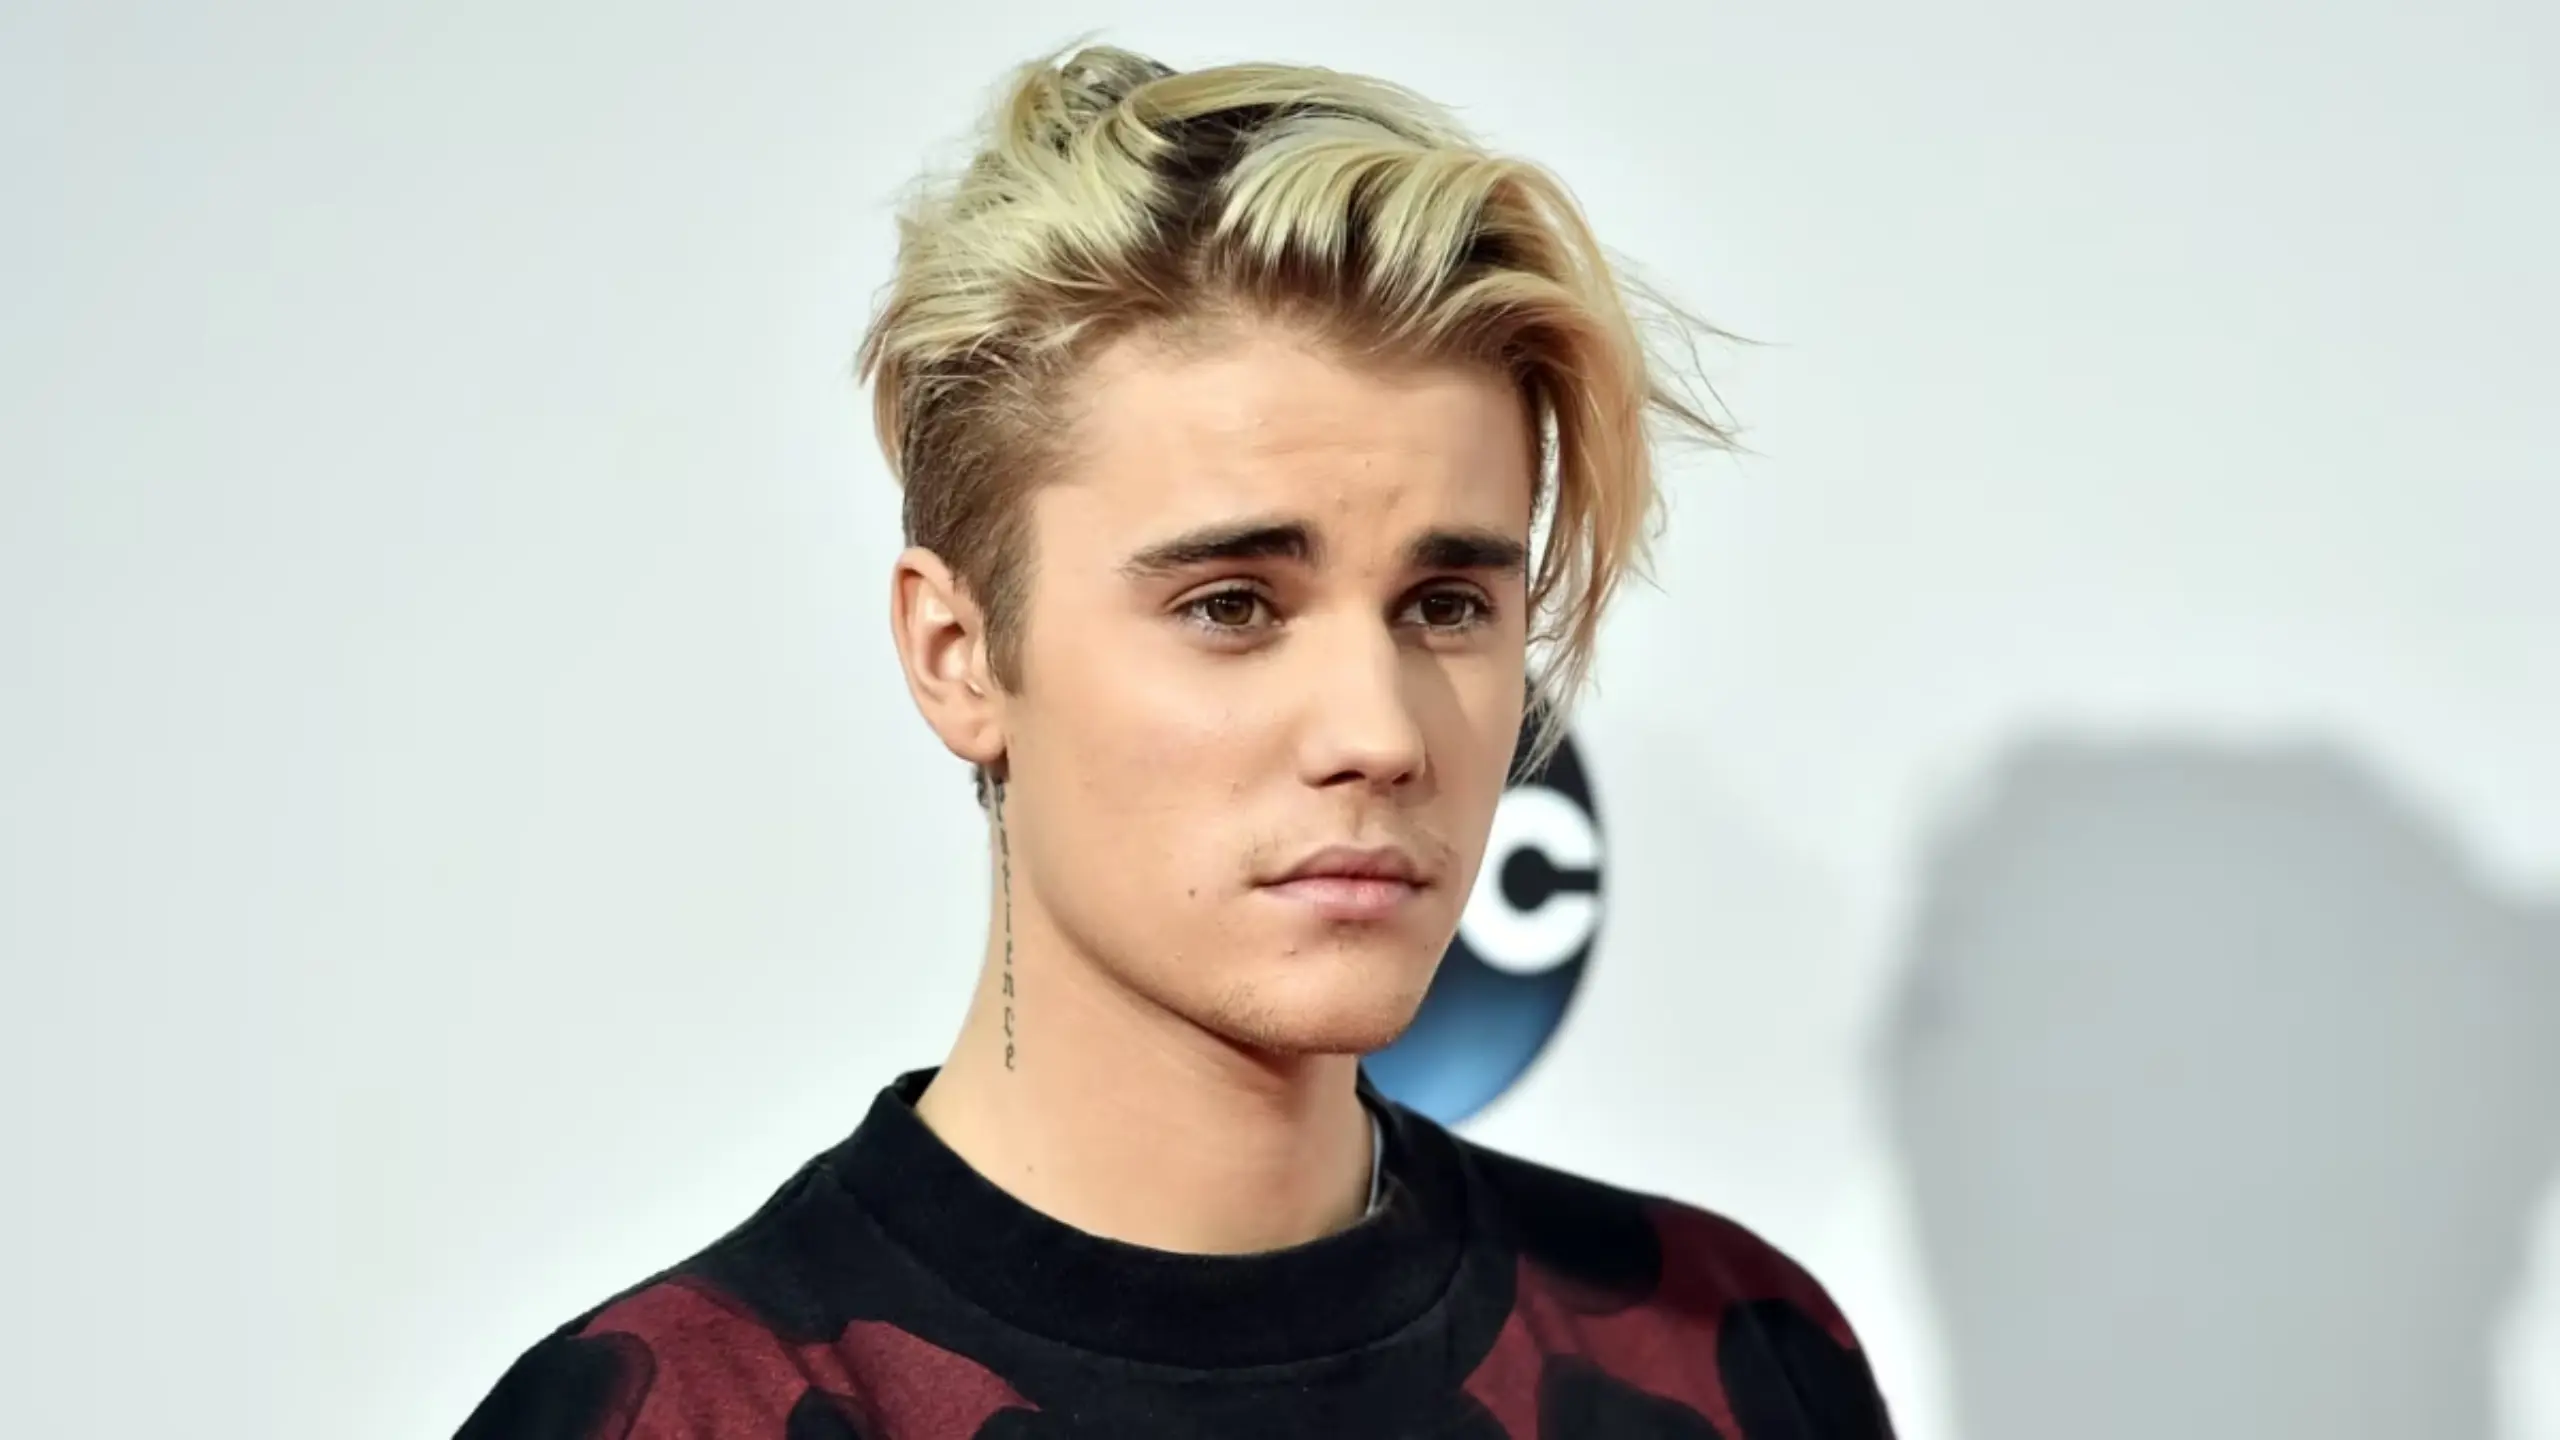 Justin Bieber Dies A Fake News Story That Fooled Many Fans